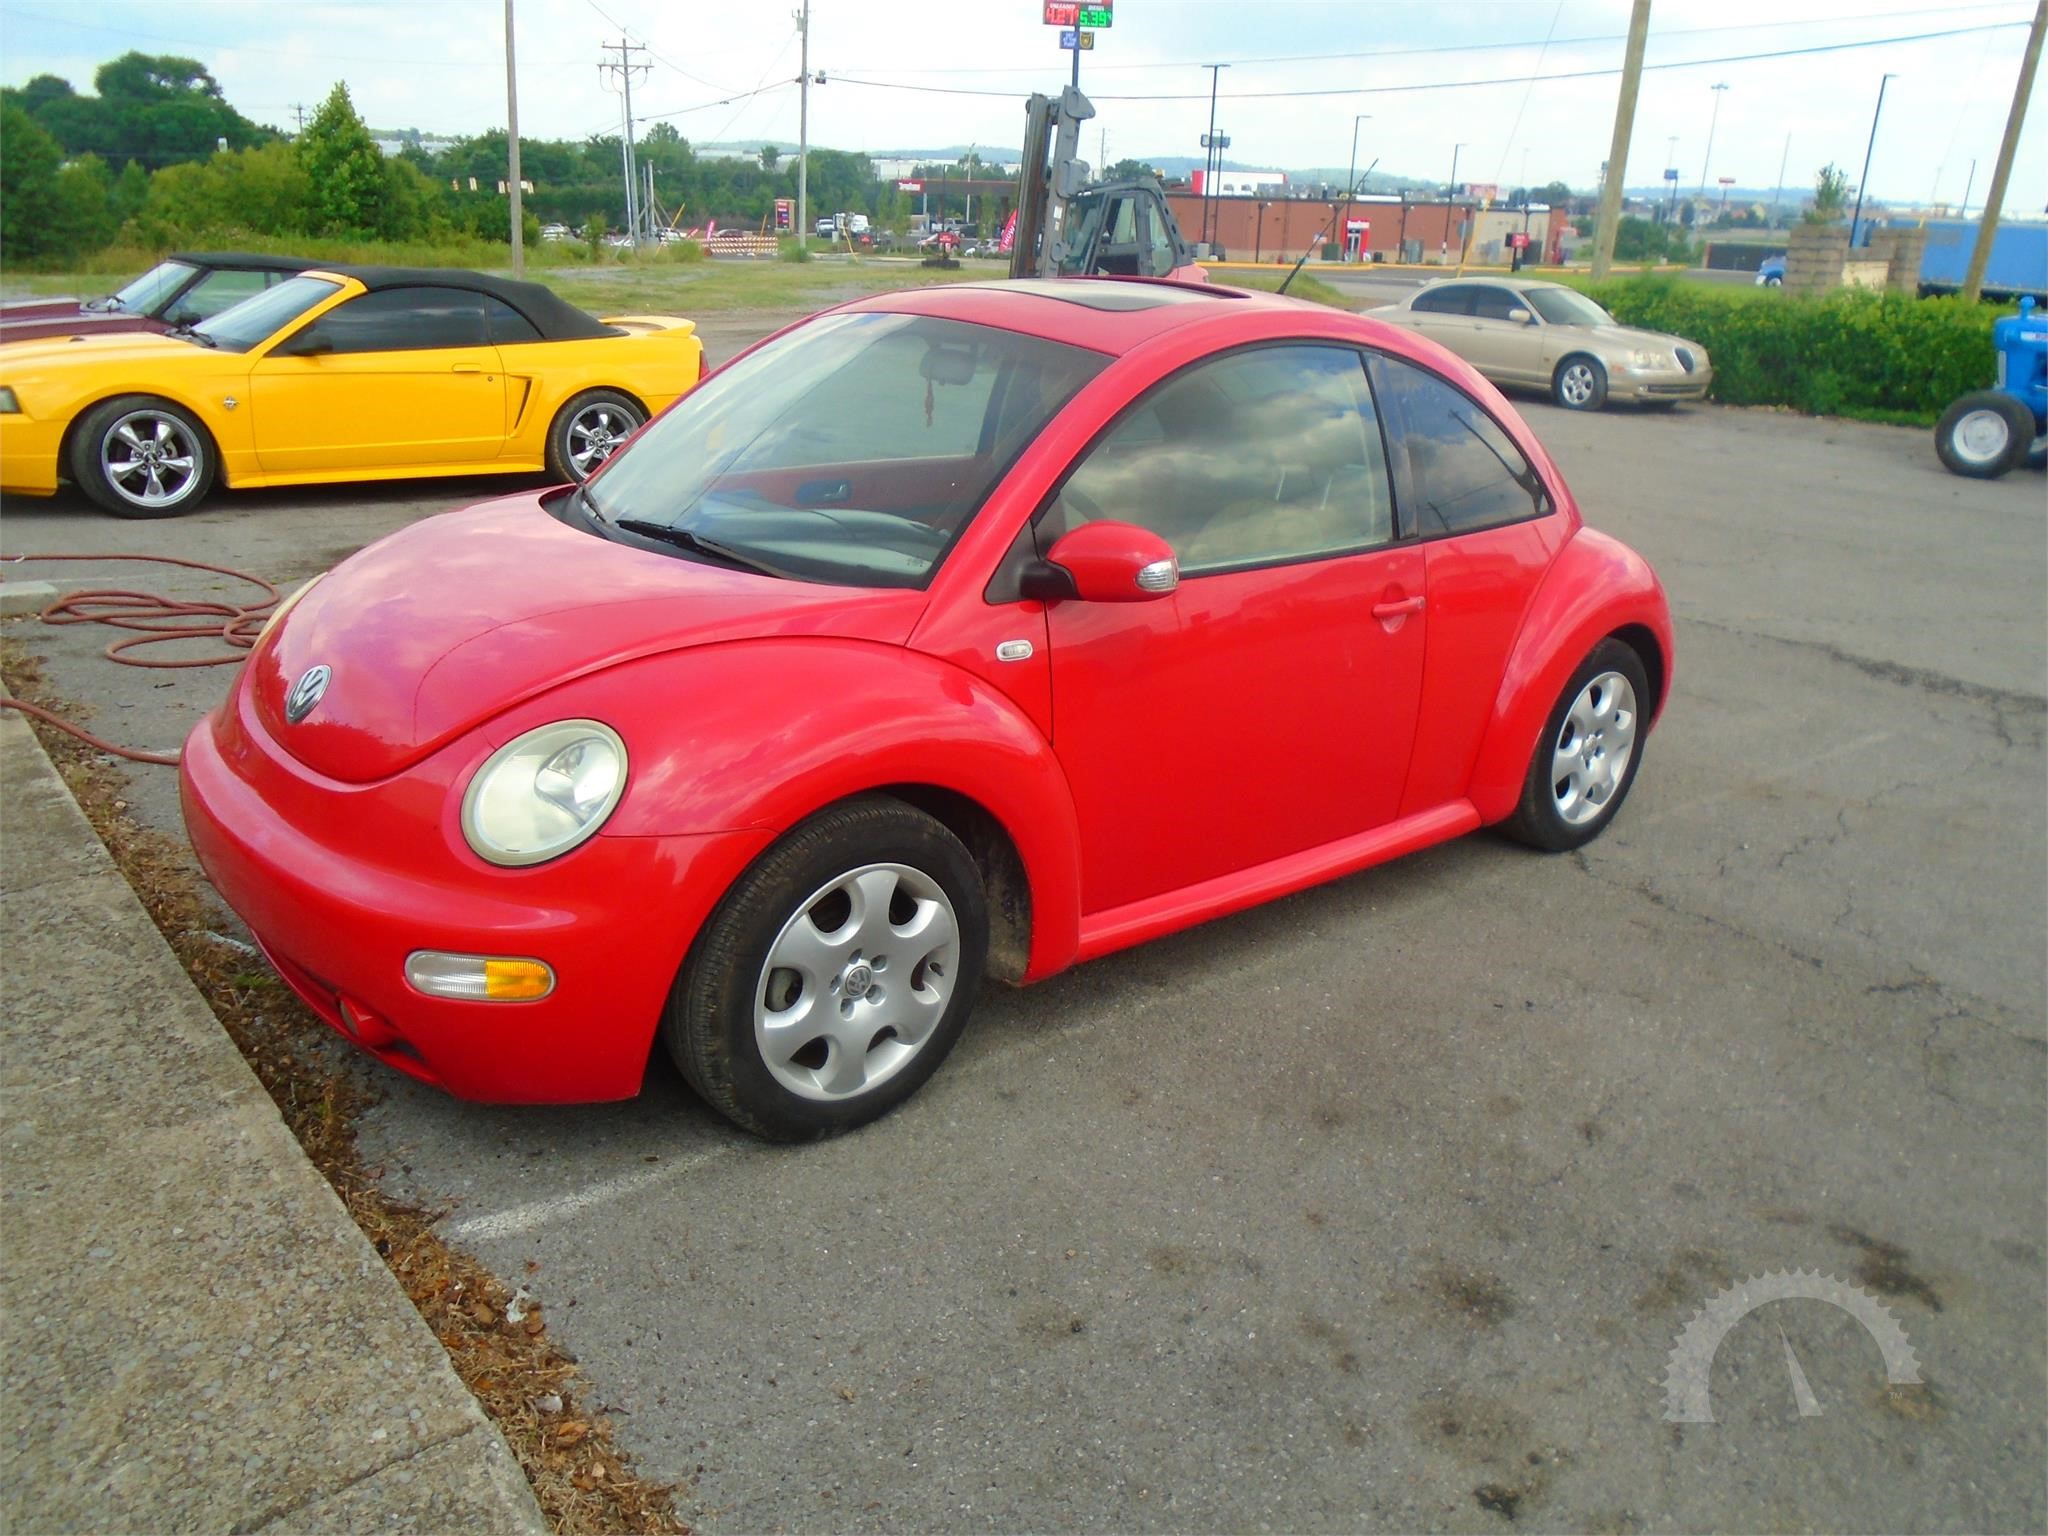 VOLKSWAGEN BEETLE Otherstock Auction Results - 8 Listings 